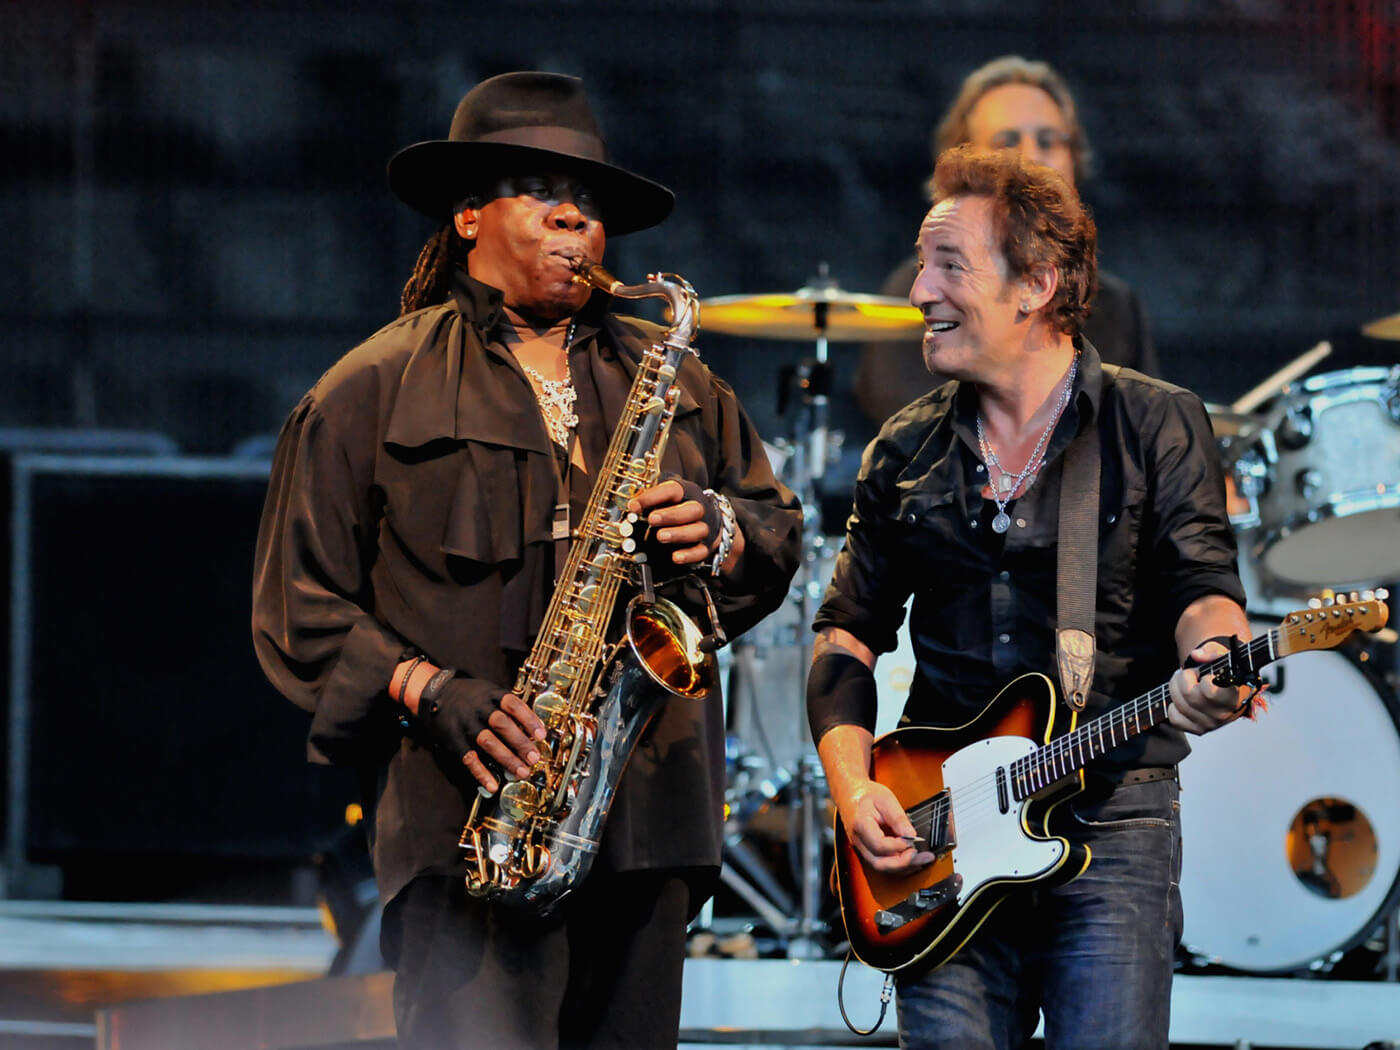 Bruce Springsteen recalls playing guitar for Clarence Clemons in hospital as he died